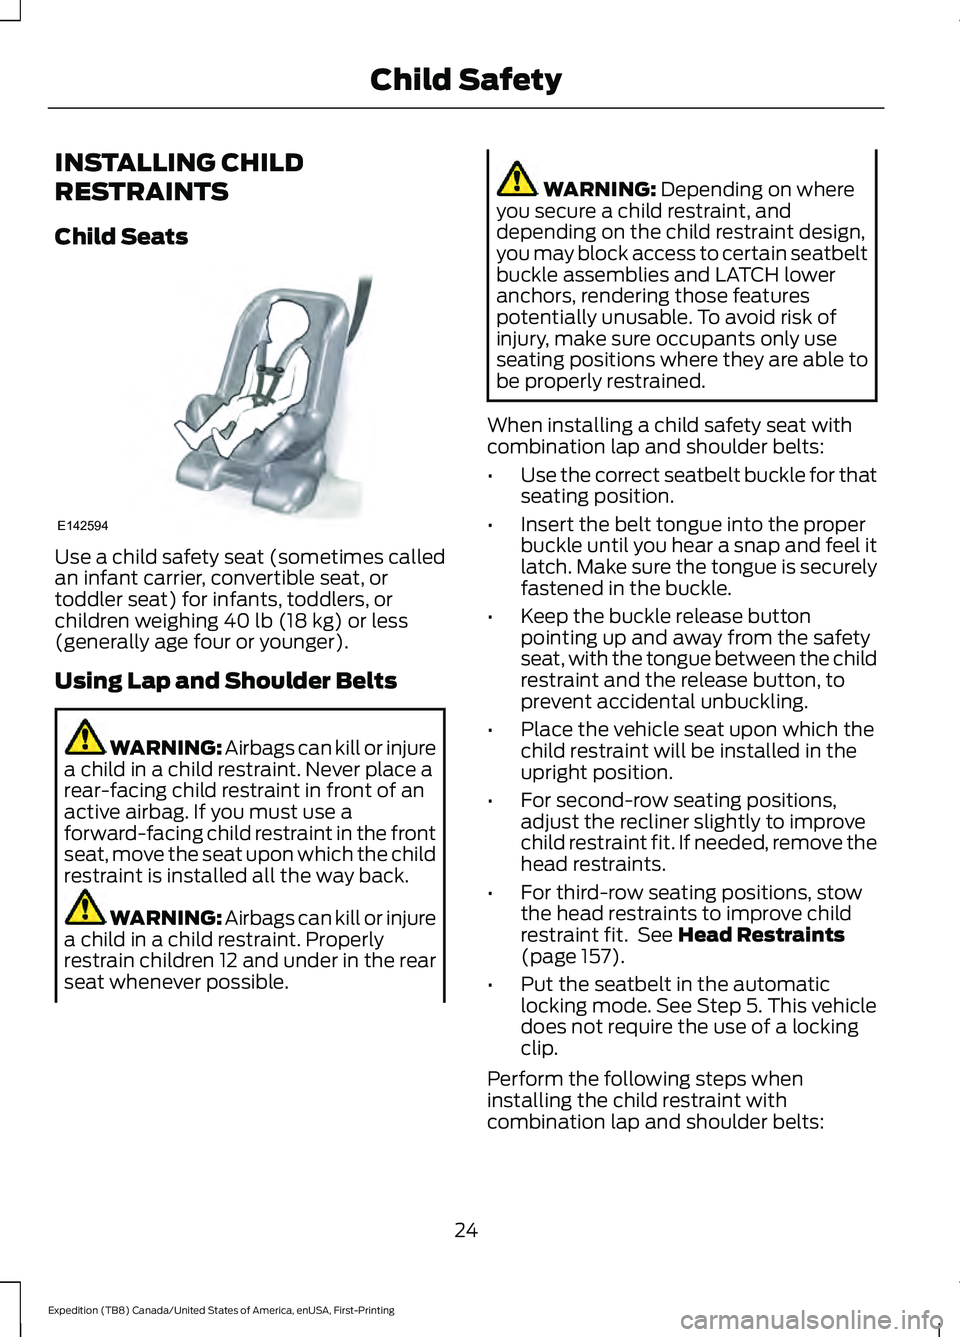 FORD EXPEDITION 2021  Owners Manual INSTALLING CHILD
RESTRAINTS
Child Seats
Use a child safety seat (sometimes called
an infant carrier, convertible seat, or
toddler seat) for infants, toddlers, or
children weighing 40 lb (18 kg) or les